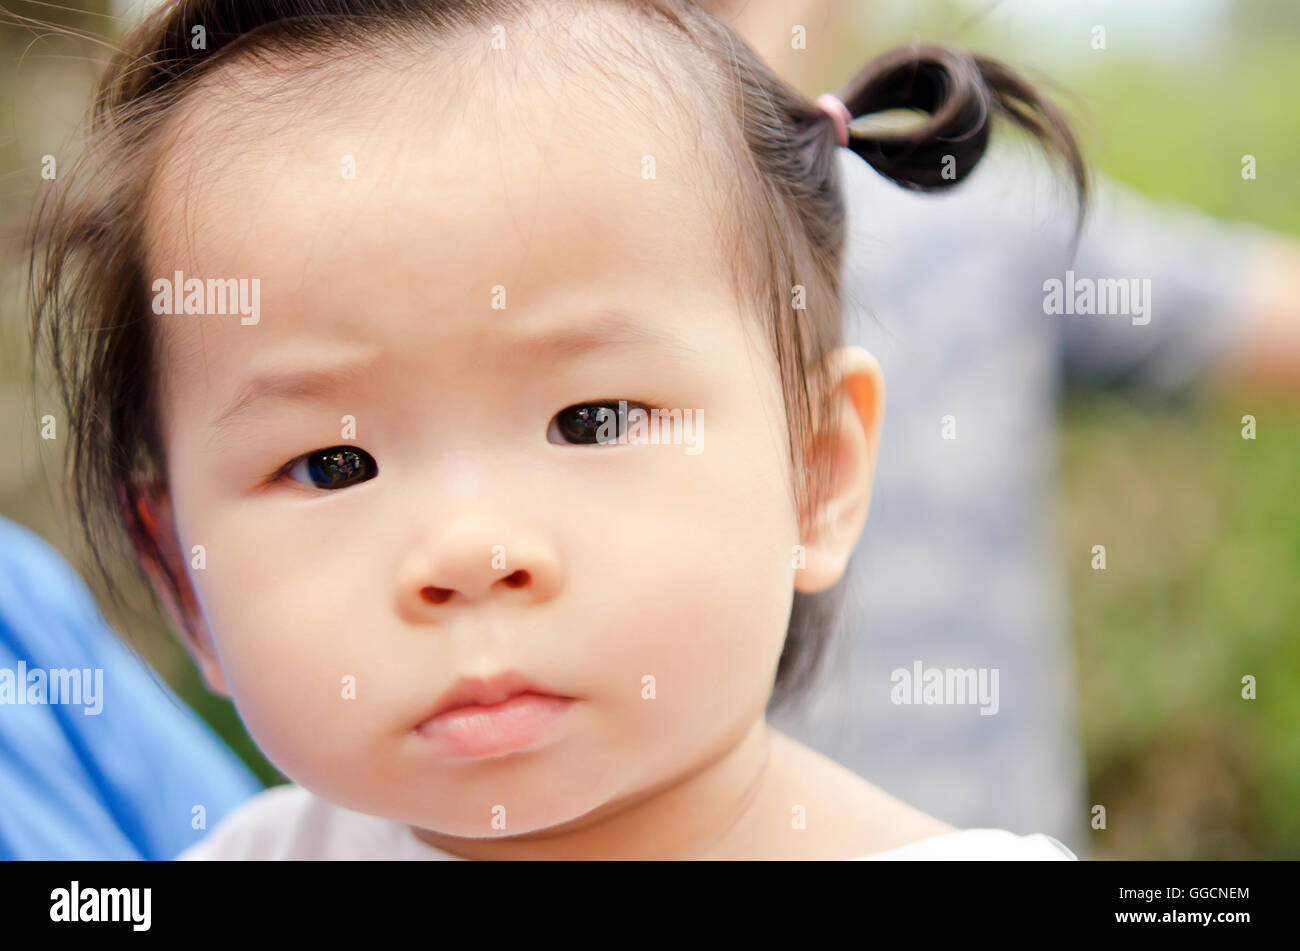 Sweet little girl outdoors with questionable eyes looking to the lens Stock Photo